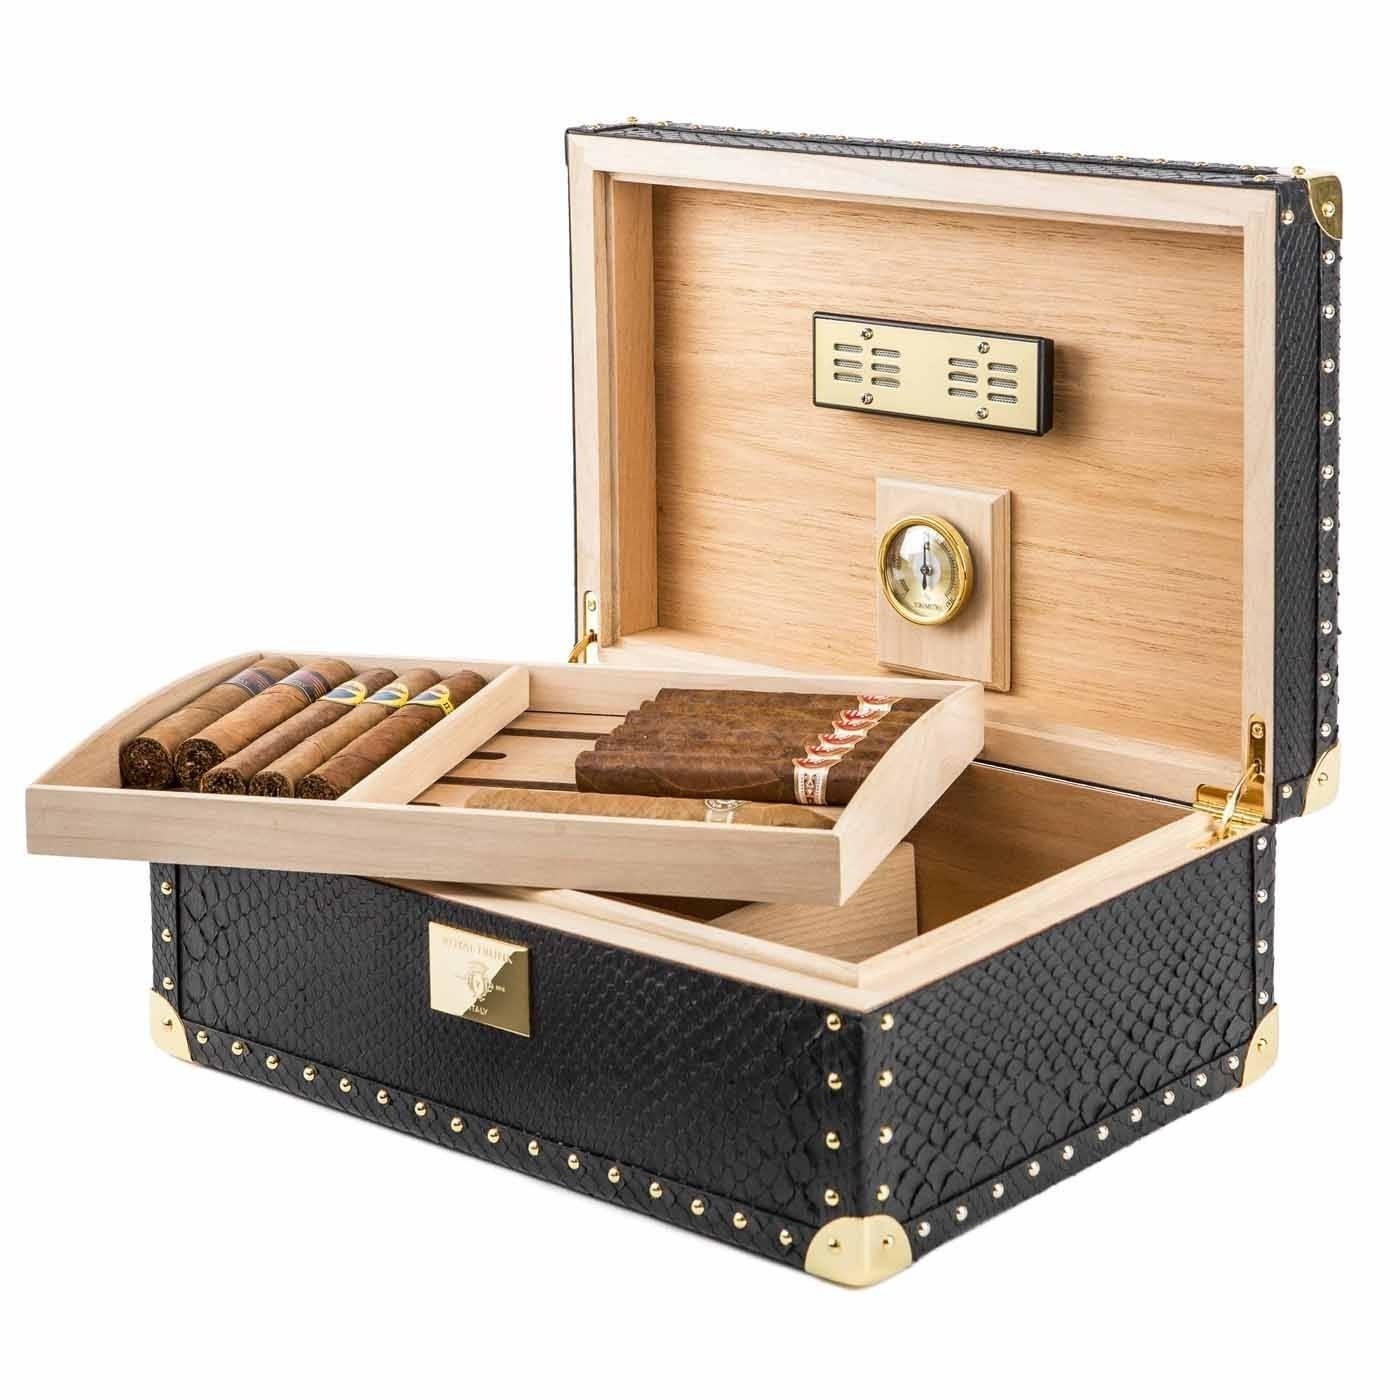 This superb humidor case can store up to about 70 cigars. Its internal structure is in Spanish cedar wood and it is built according to the most recent standards with a highly-precise humidification system. The external cover is in real python skin